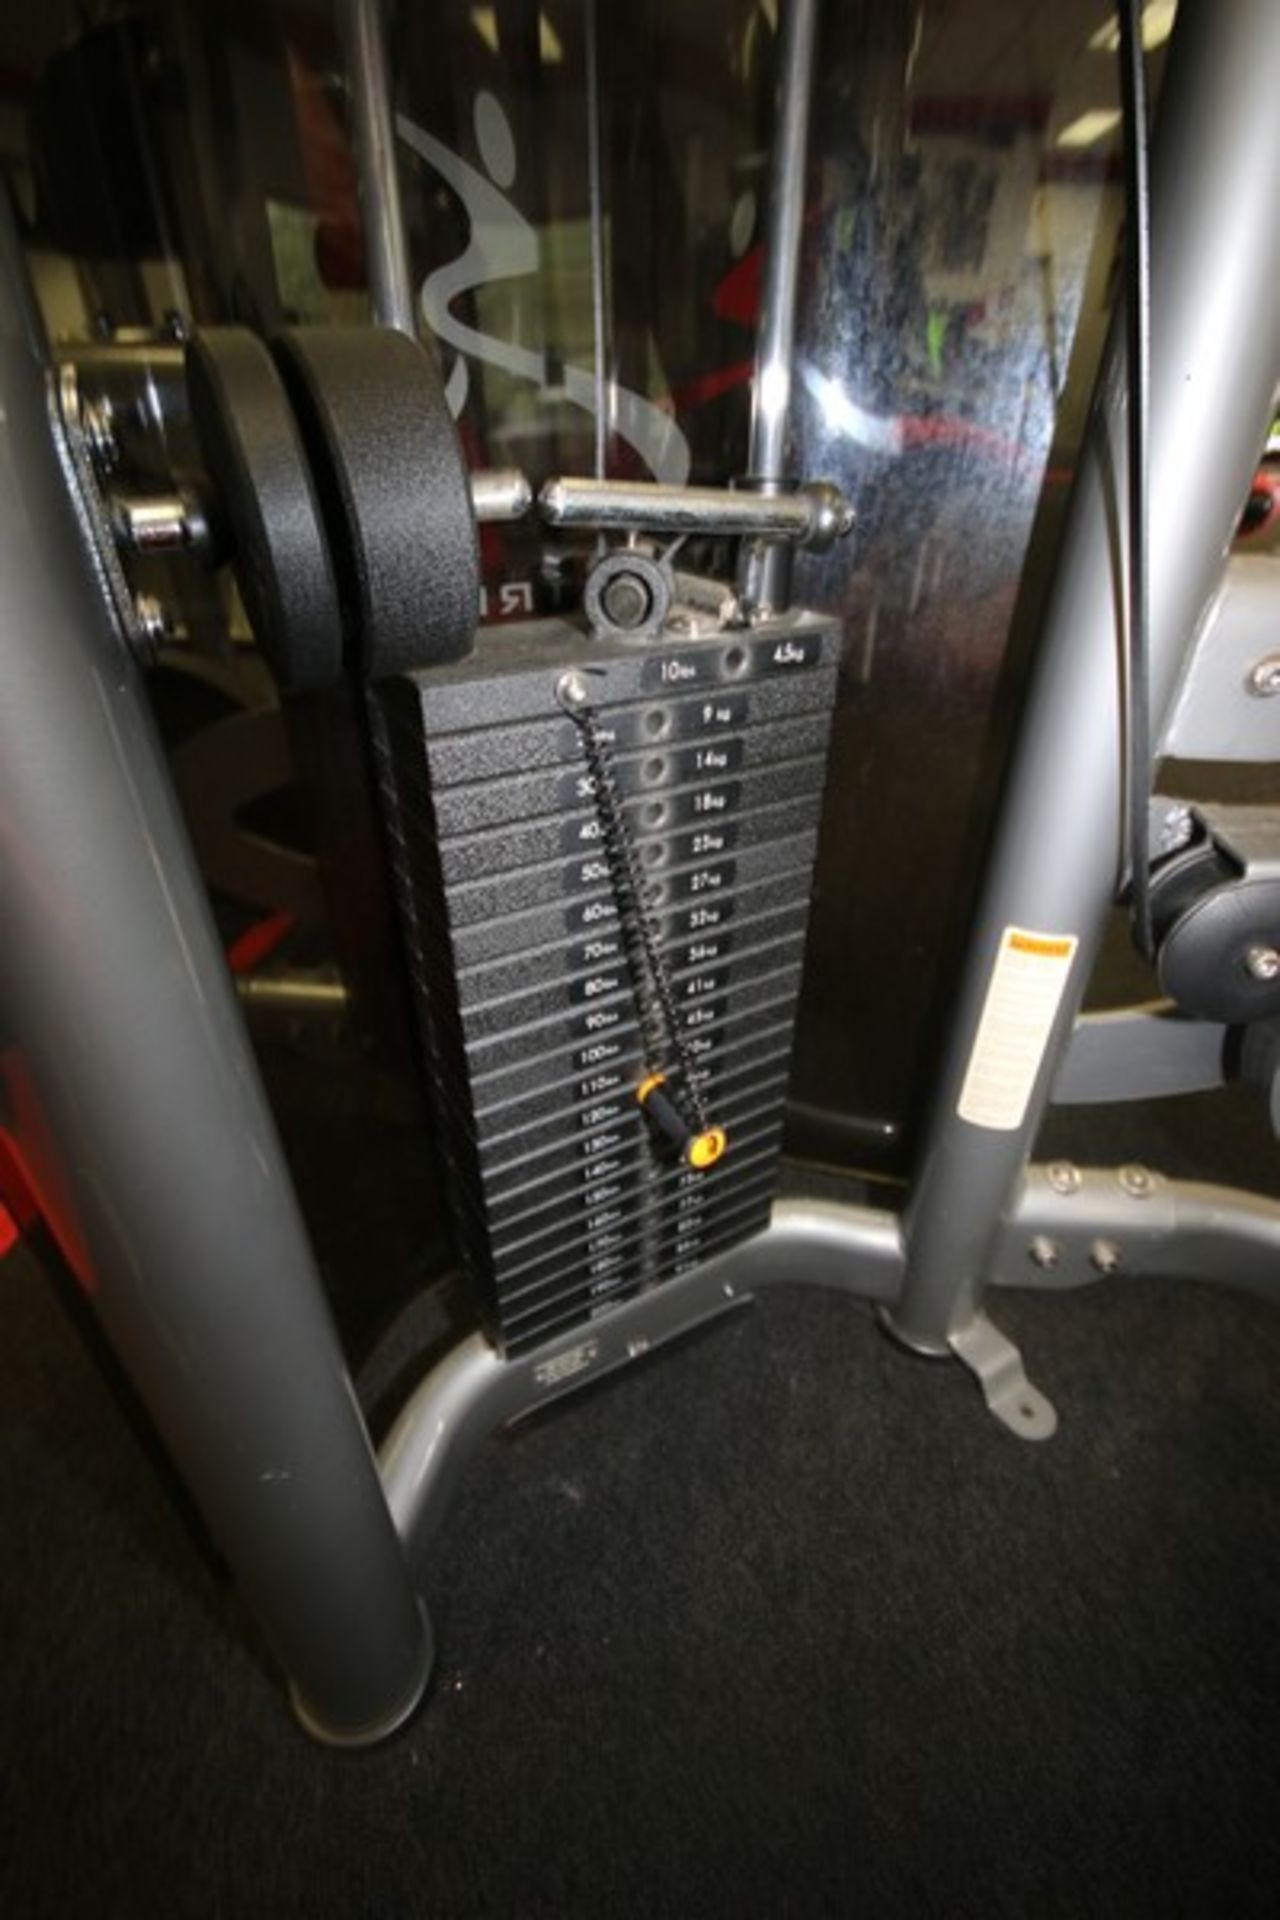 Matrix Shoulder Press Cable Machine, 10-200 lbs. Weight Range on Plates, Overall Dims.: Aprox. 55" L - Image 3 of 5